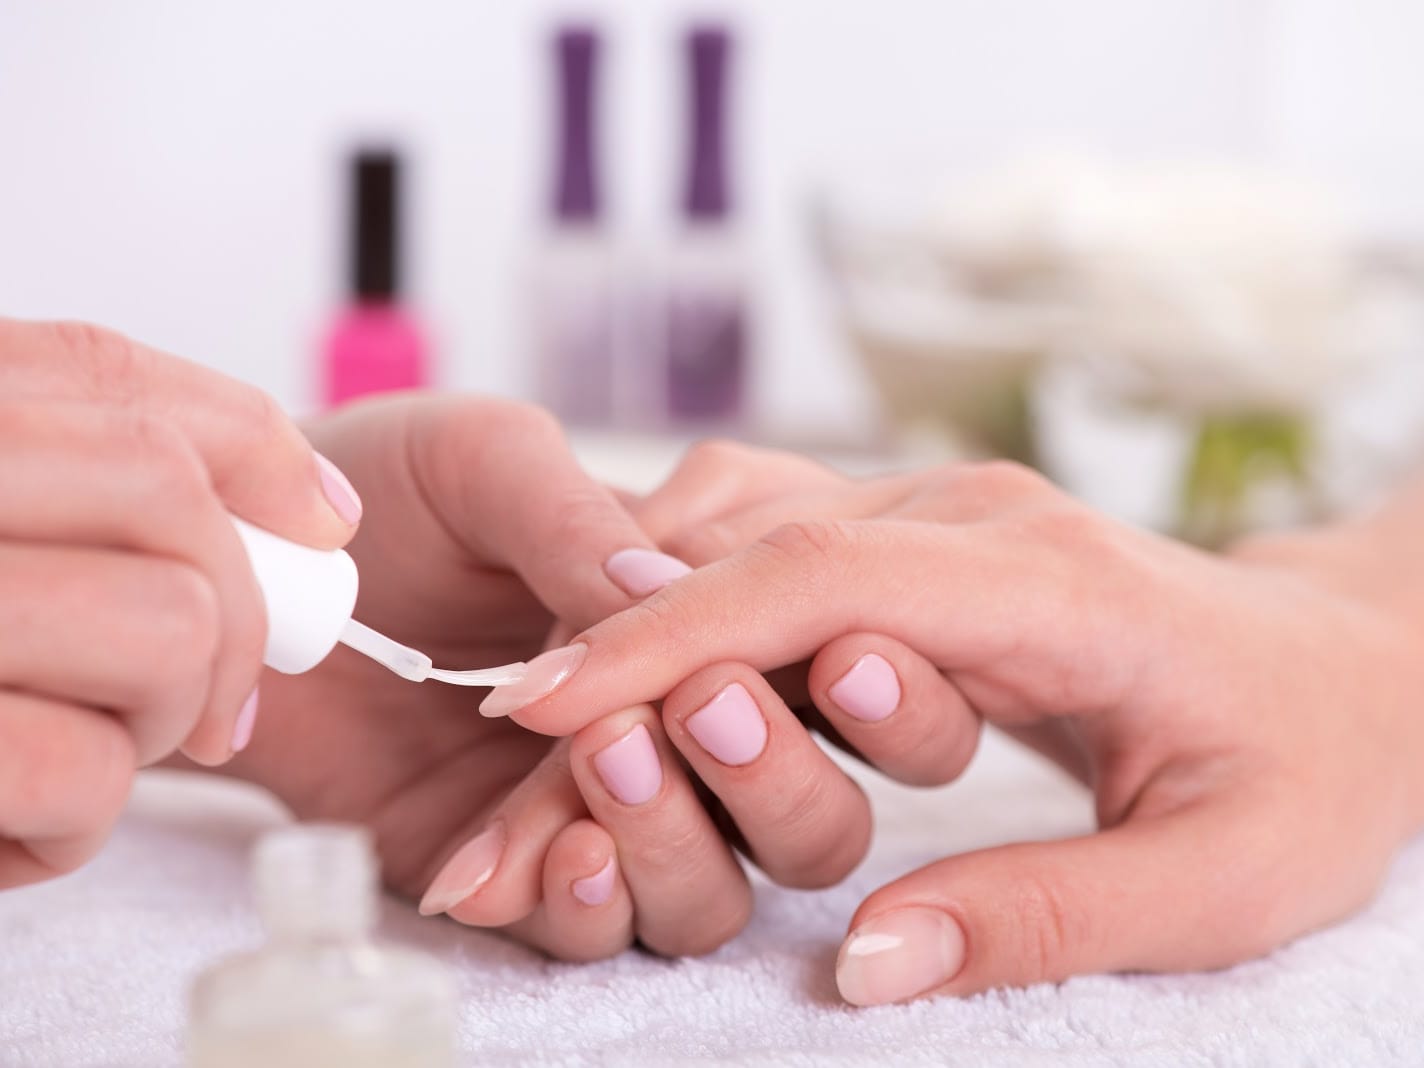 Gel Manicure and Classic Pedicure + Nail Art + Return Soak off (1 Sessions) at Specialist Nail & Beauty Spa - Get Deals, Cashback and Rewards with ShopBack GO